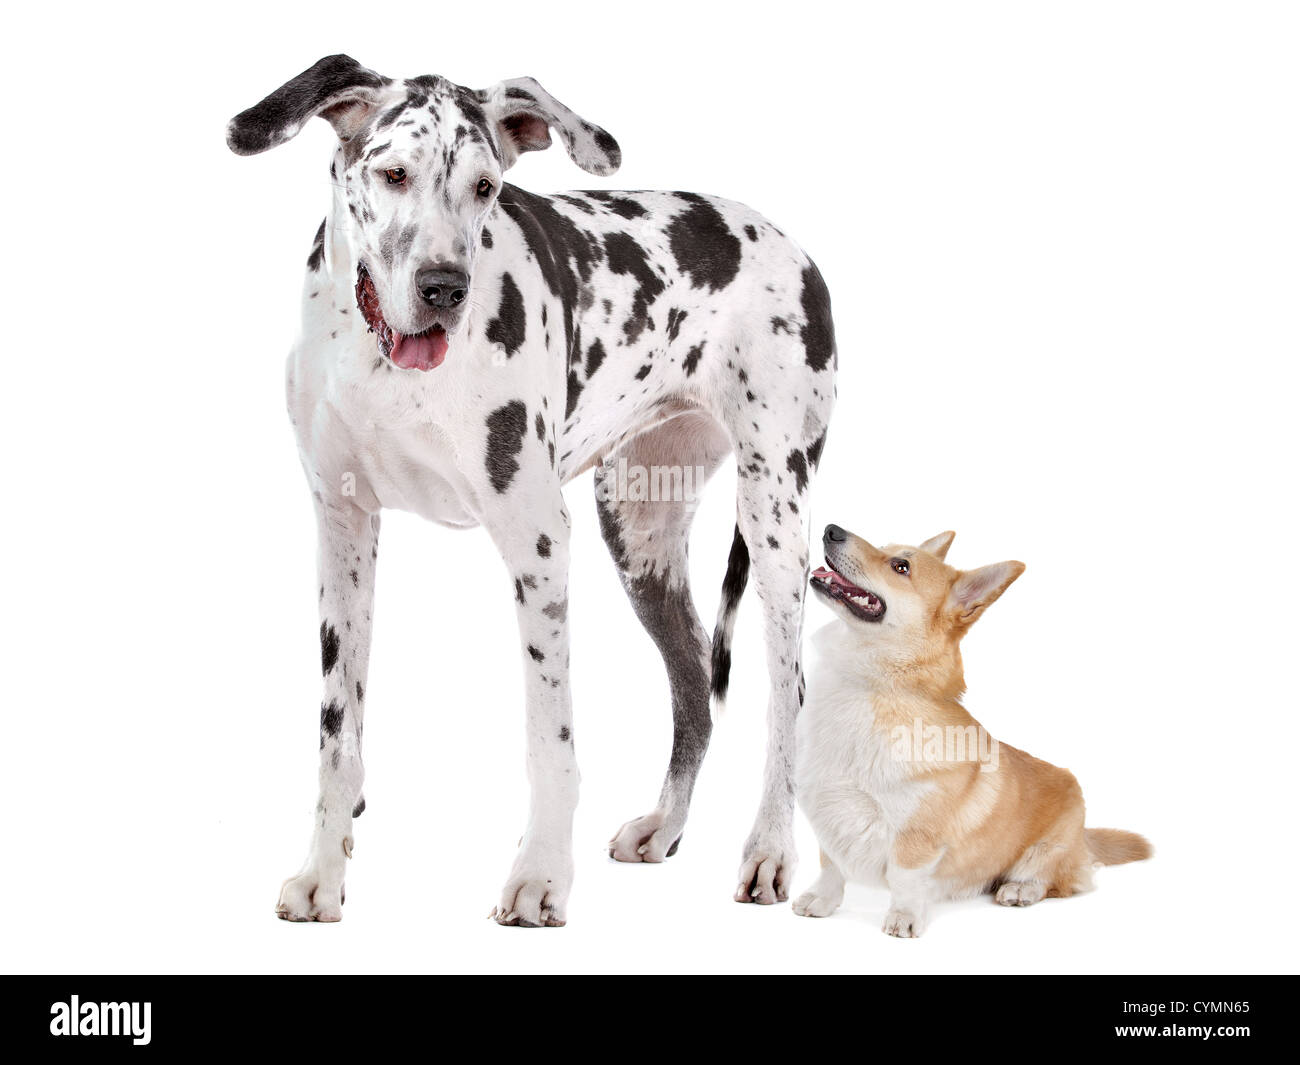 Harlequin Great Dane and aPembroke Welsh Corgi dog in front of a white background Stock Photo